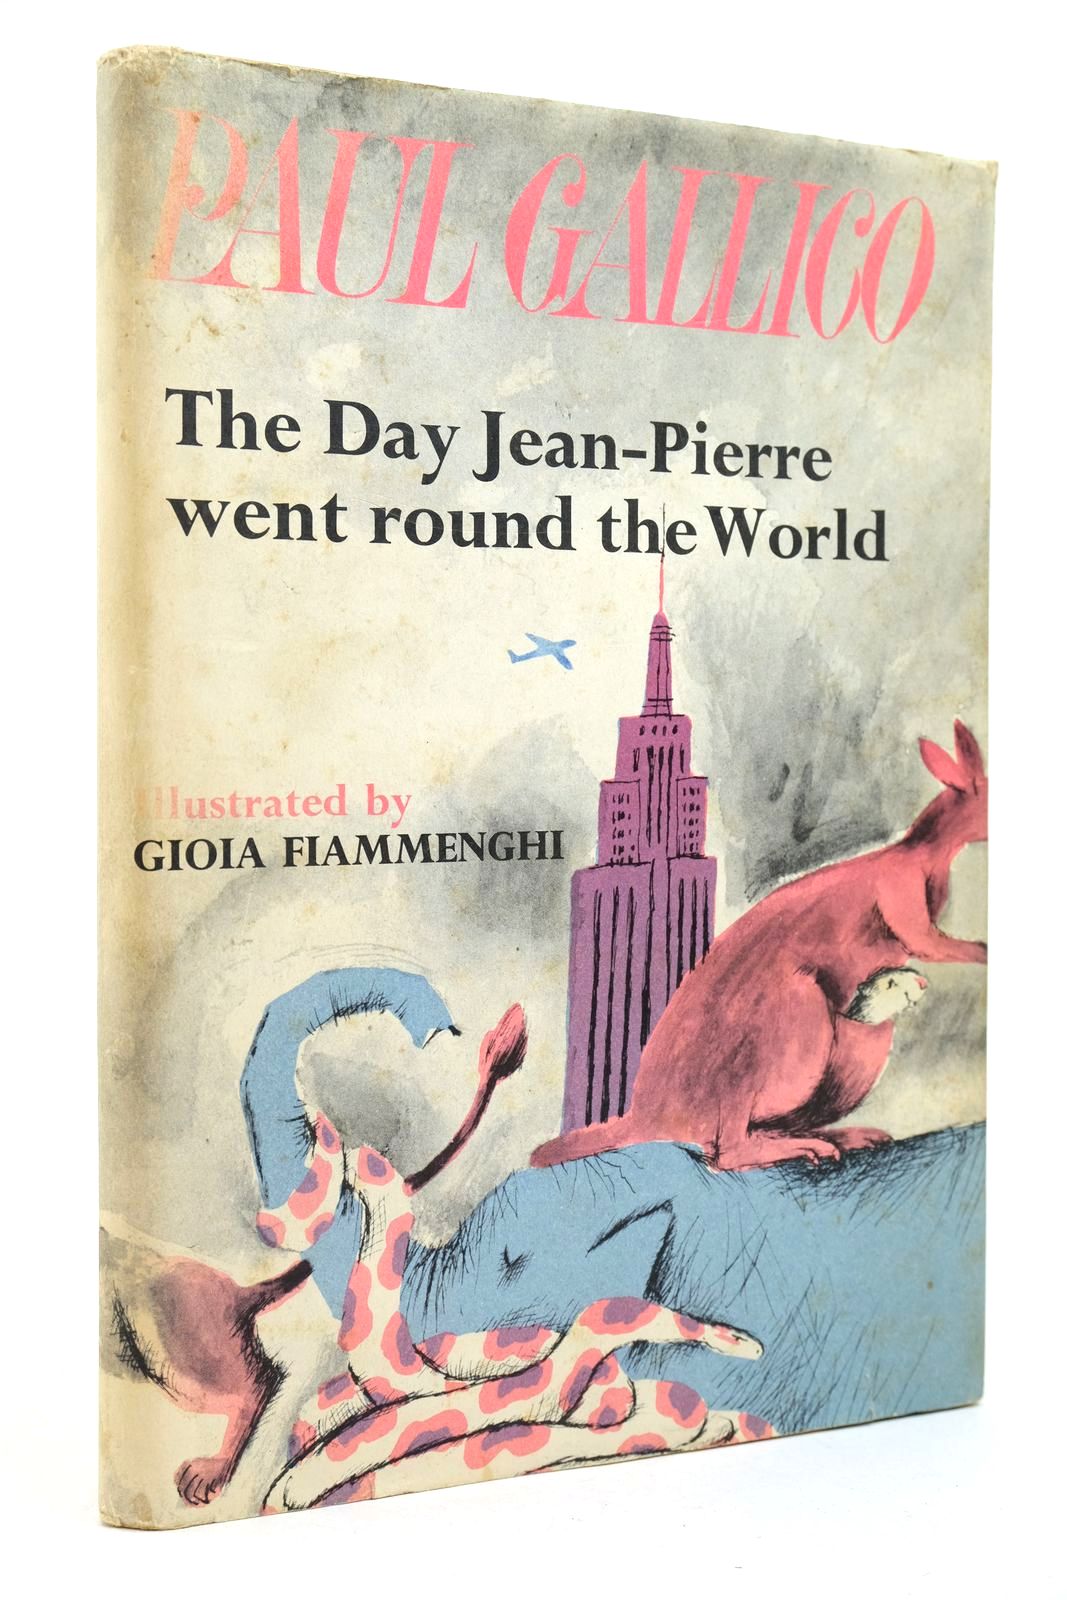 Photo of THE DAY JEAN-PIERRE WENT ROUND THE WORLD written by Gallico, Paul illustrated by Fiammenghi, Gioia published by William Heinemann Ltd. (STOCK CODE: 2139789)  for sale by Stella & Rose's Books